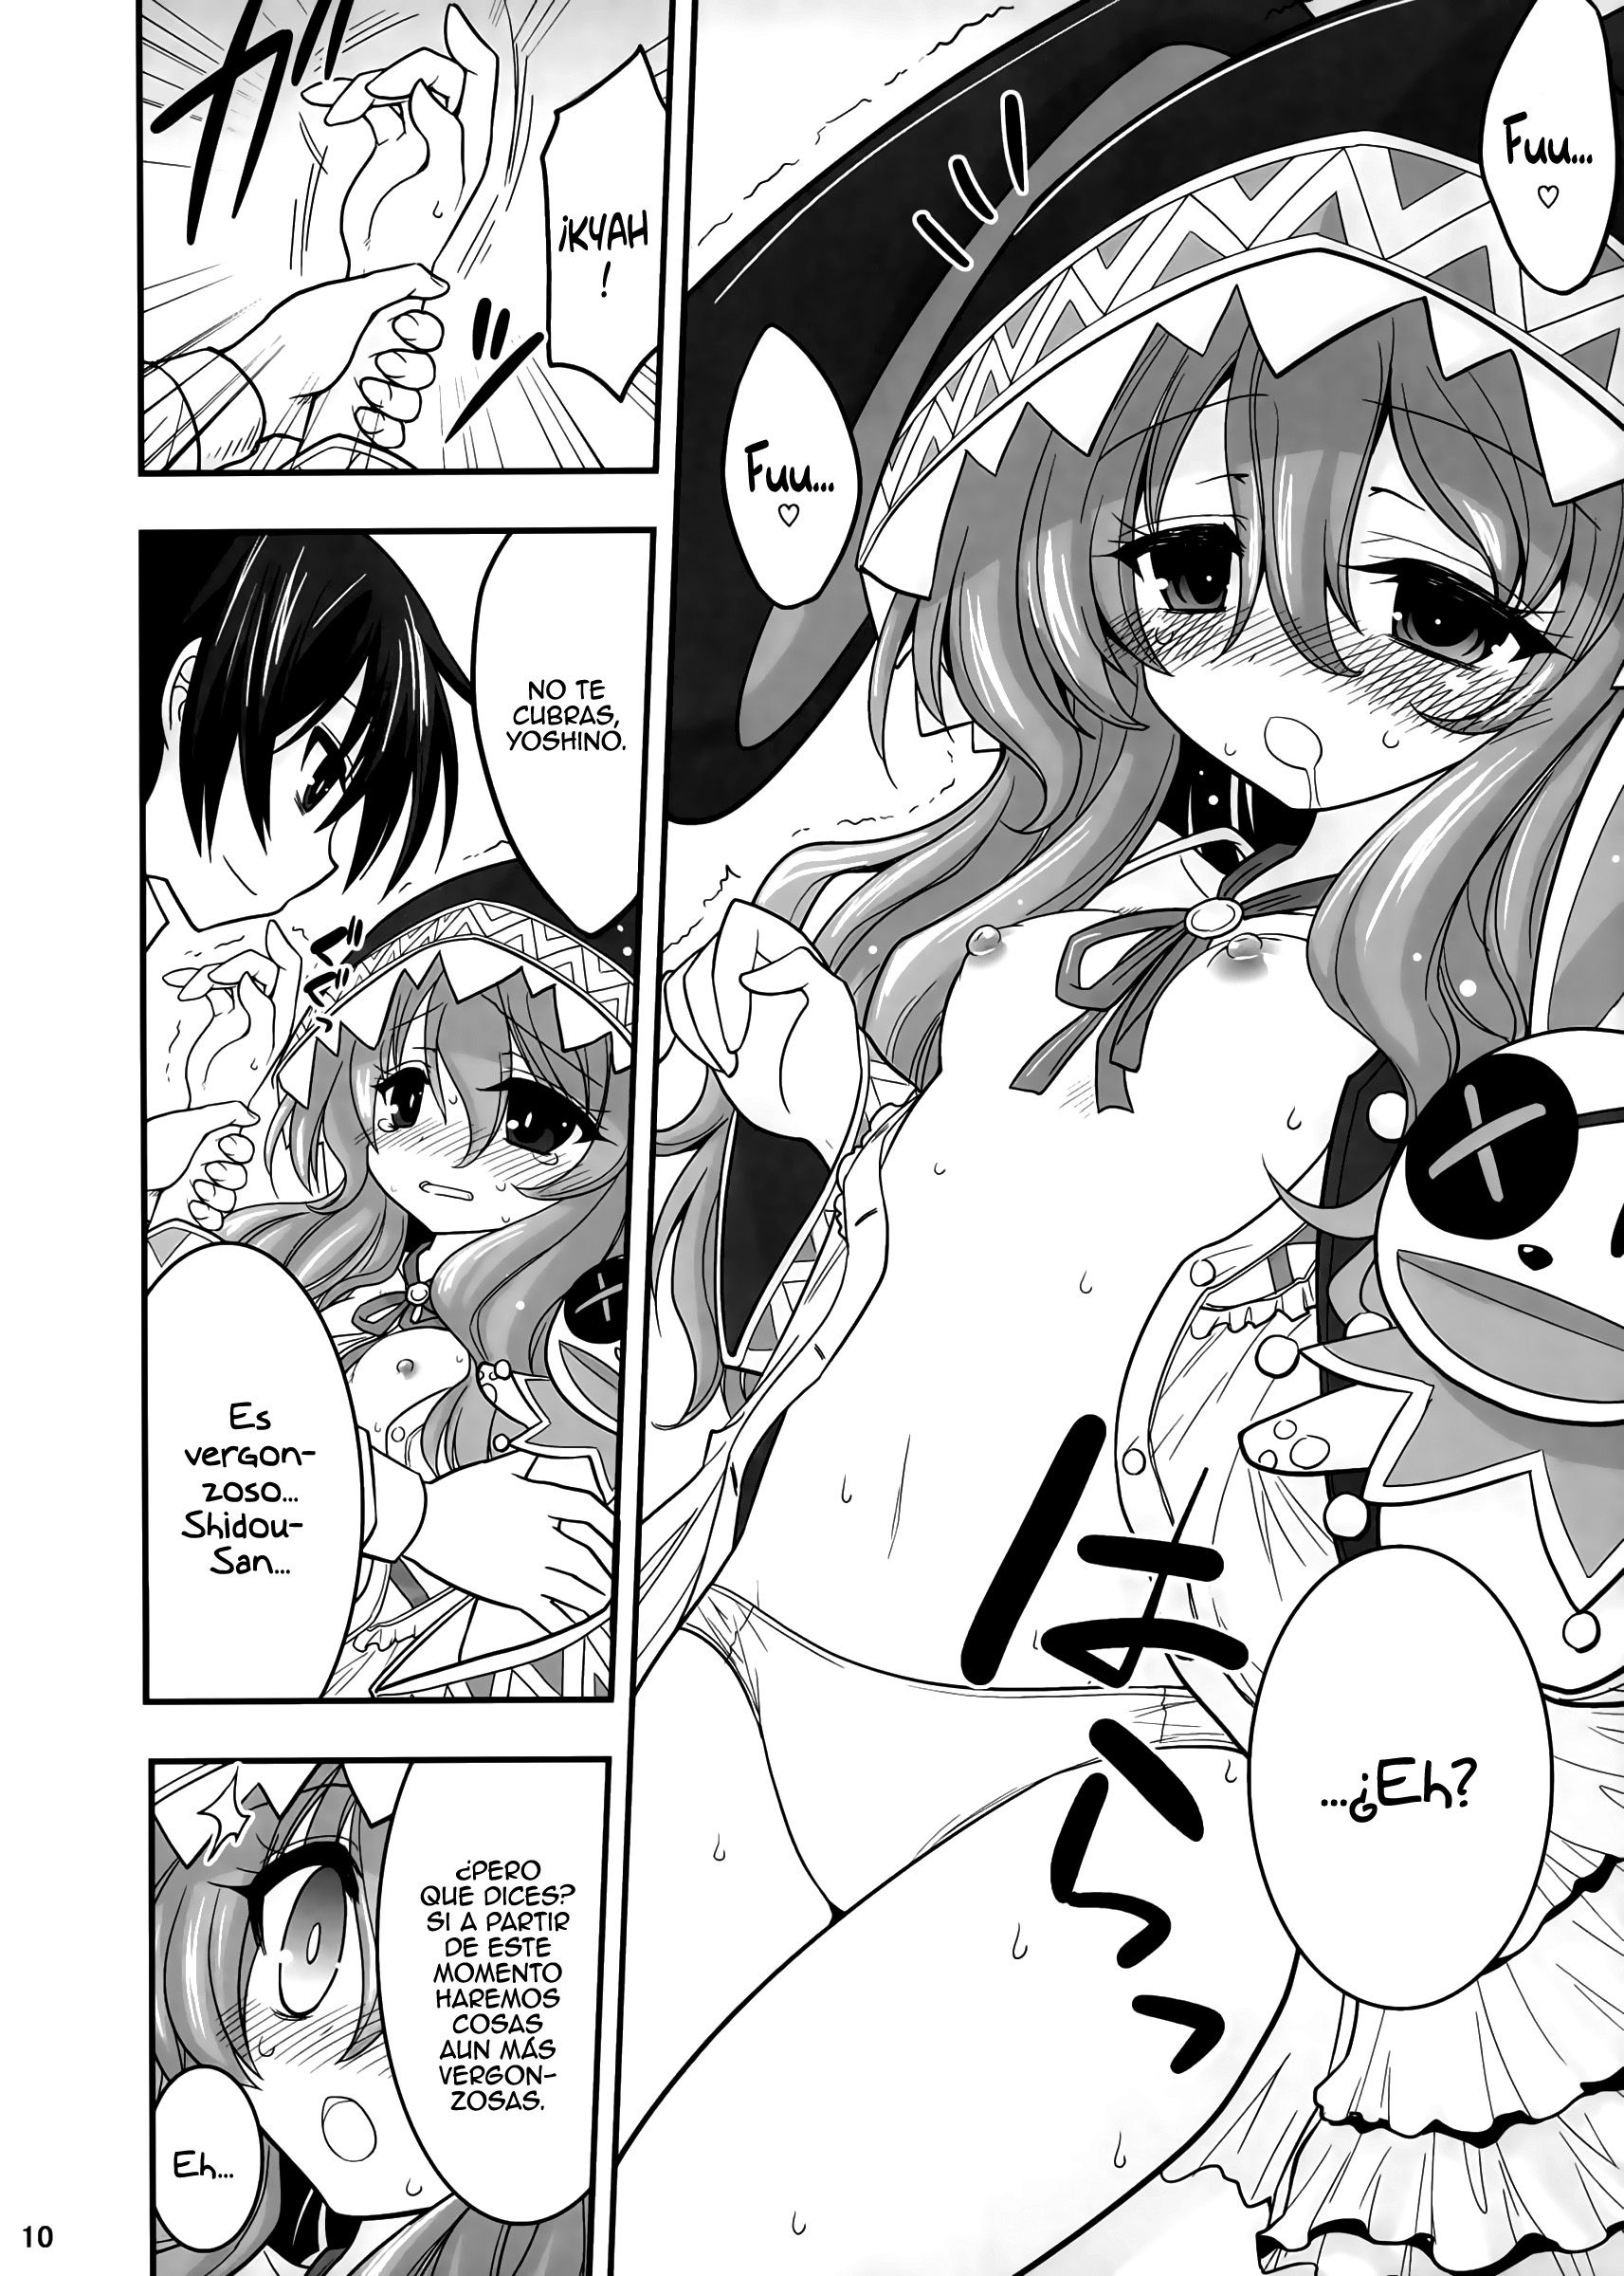 Yoshino Date After (Date A Live) - 9